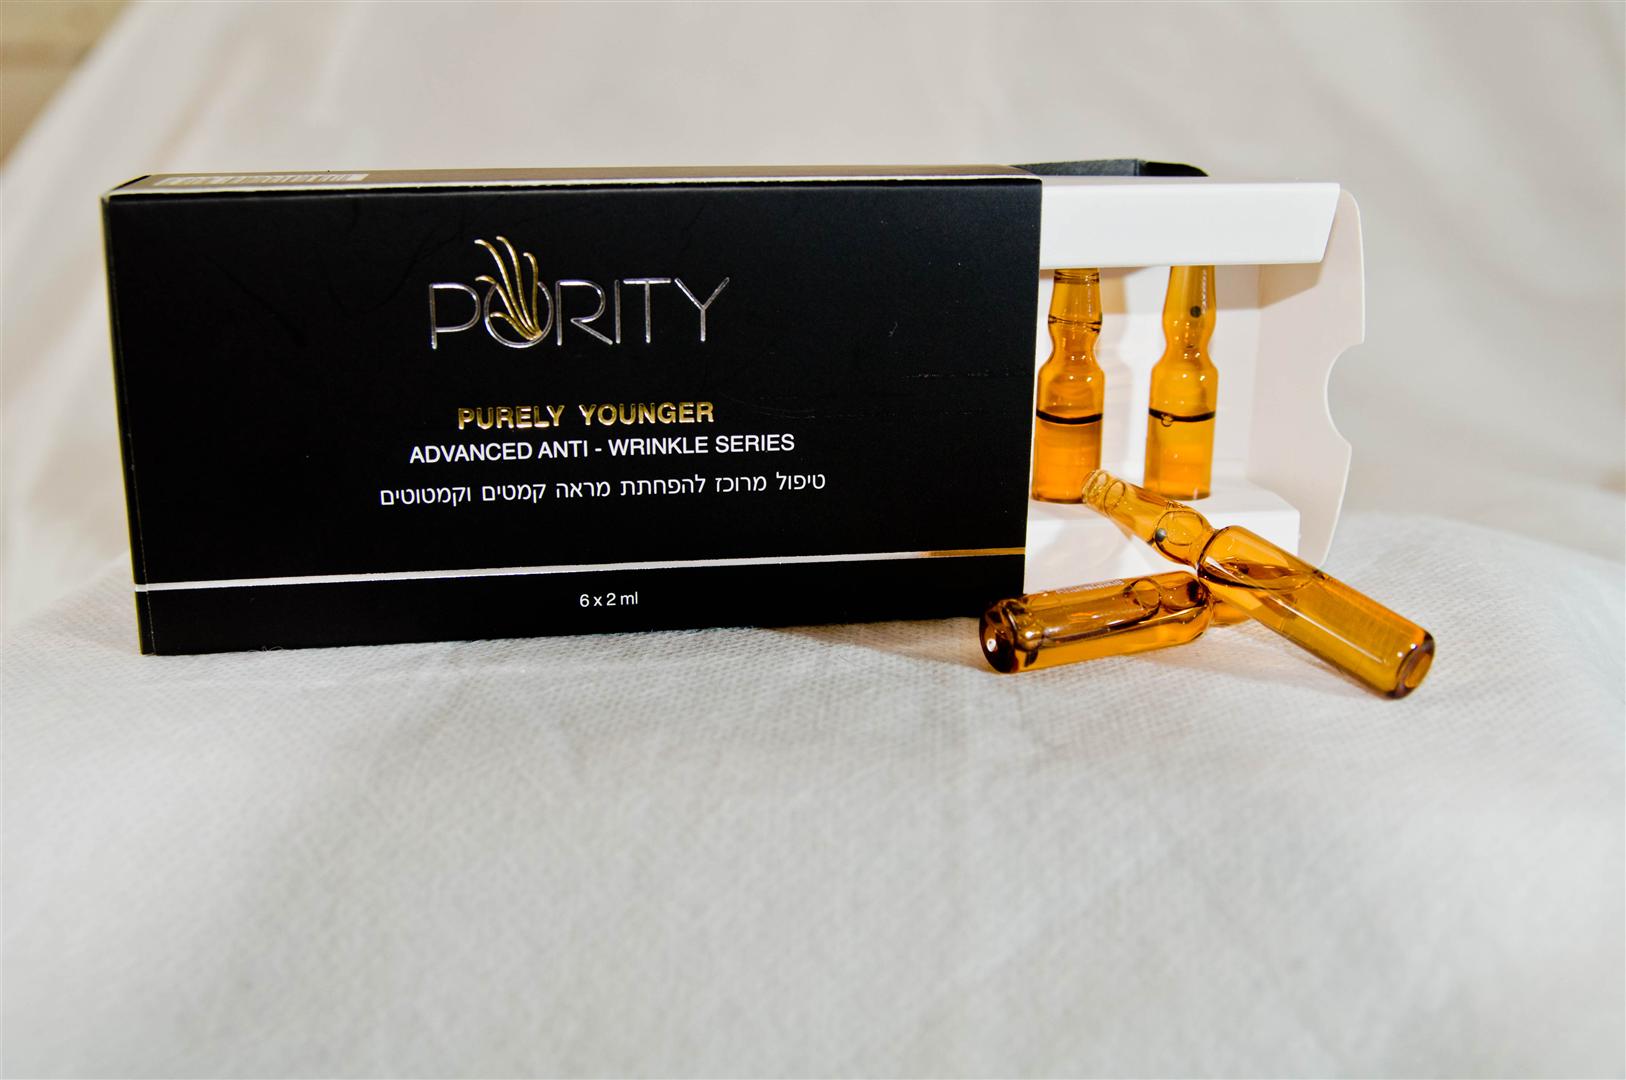 Purity anti-wrinkle ampoules